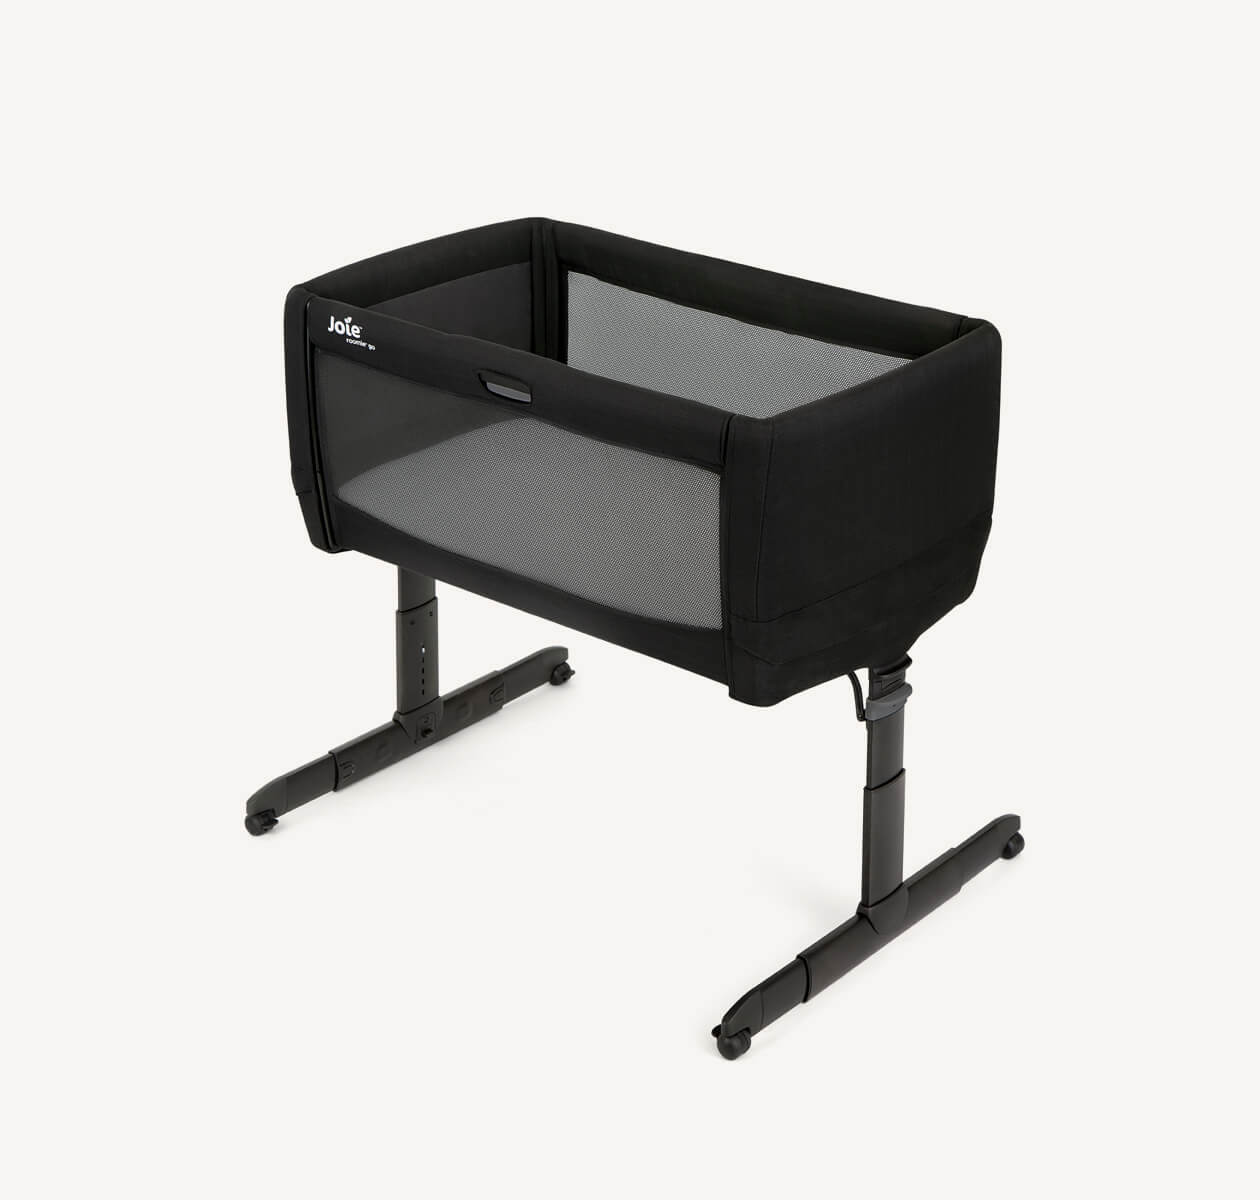 Black roomie go bedside travel crib facing straight on with the drop side raised.